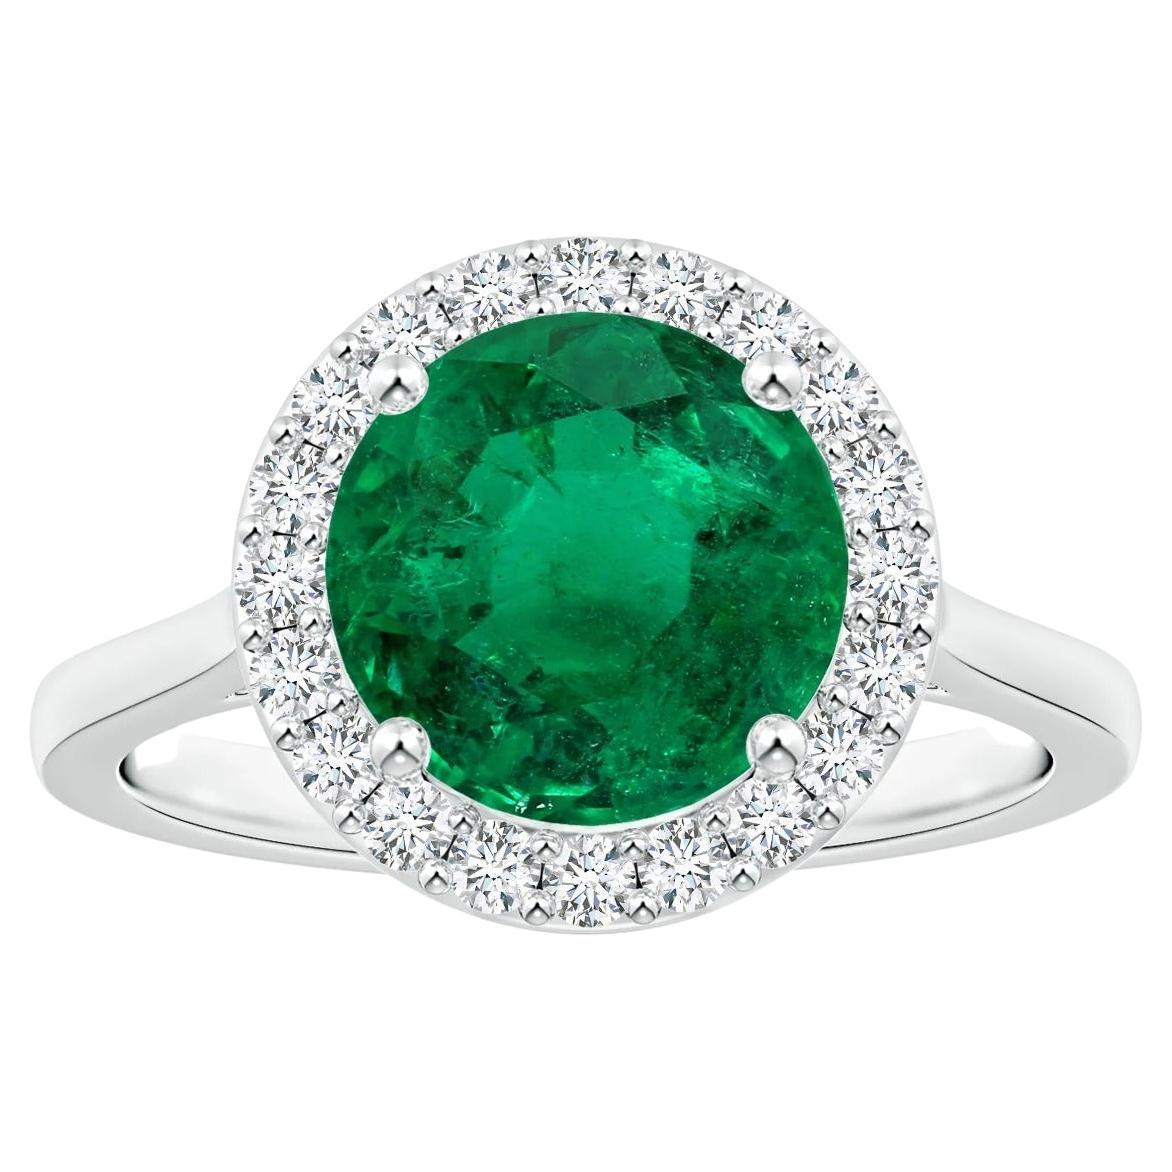 For Sale:  Angara Gia Certified Natural Round Emerald Ring in White Gold with Halo